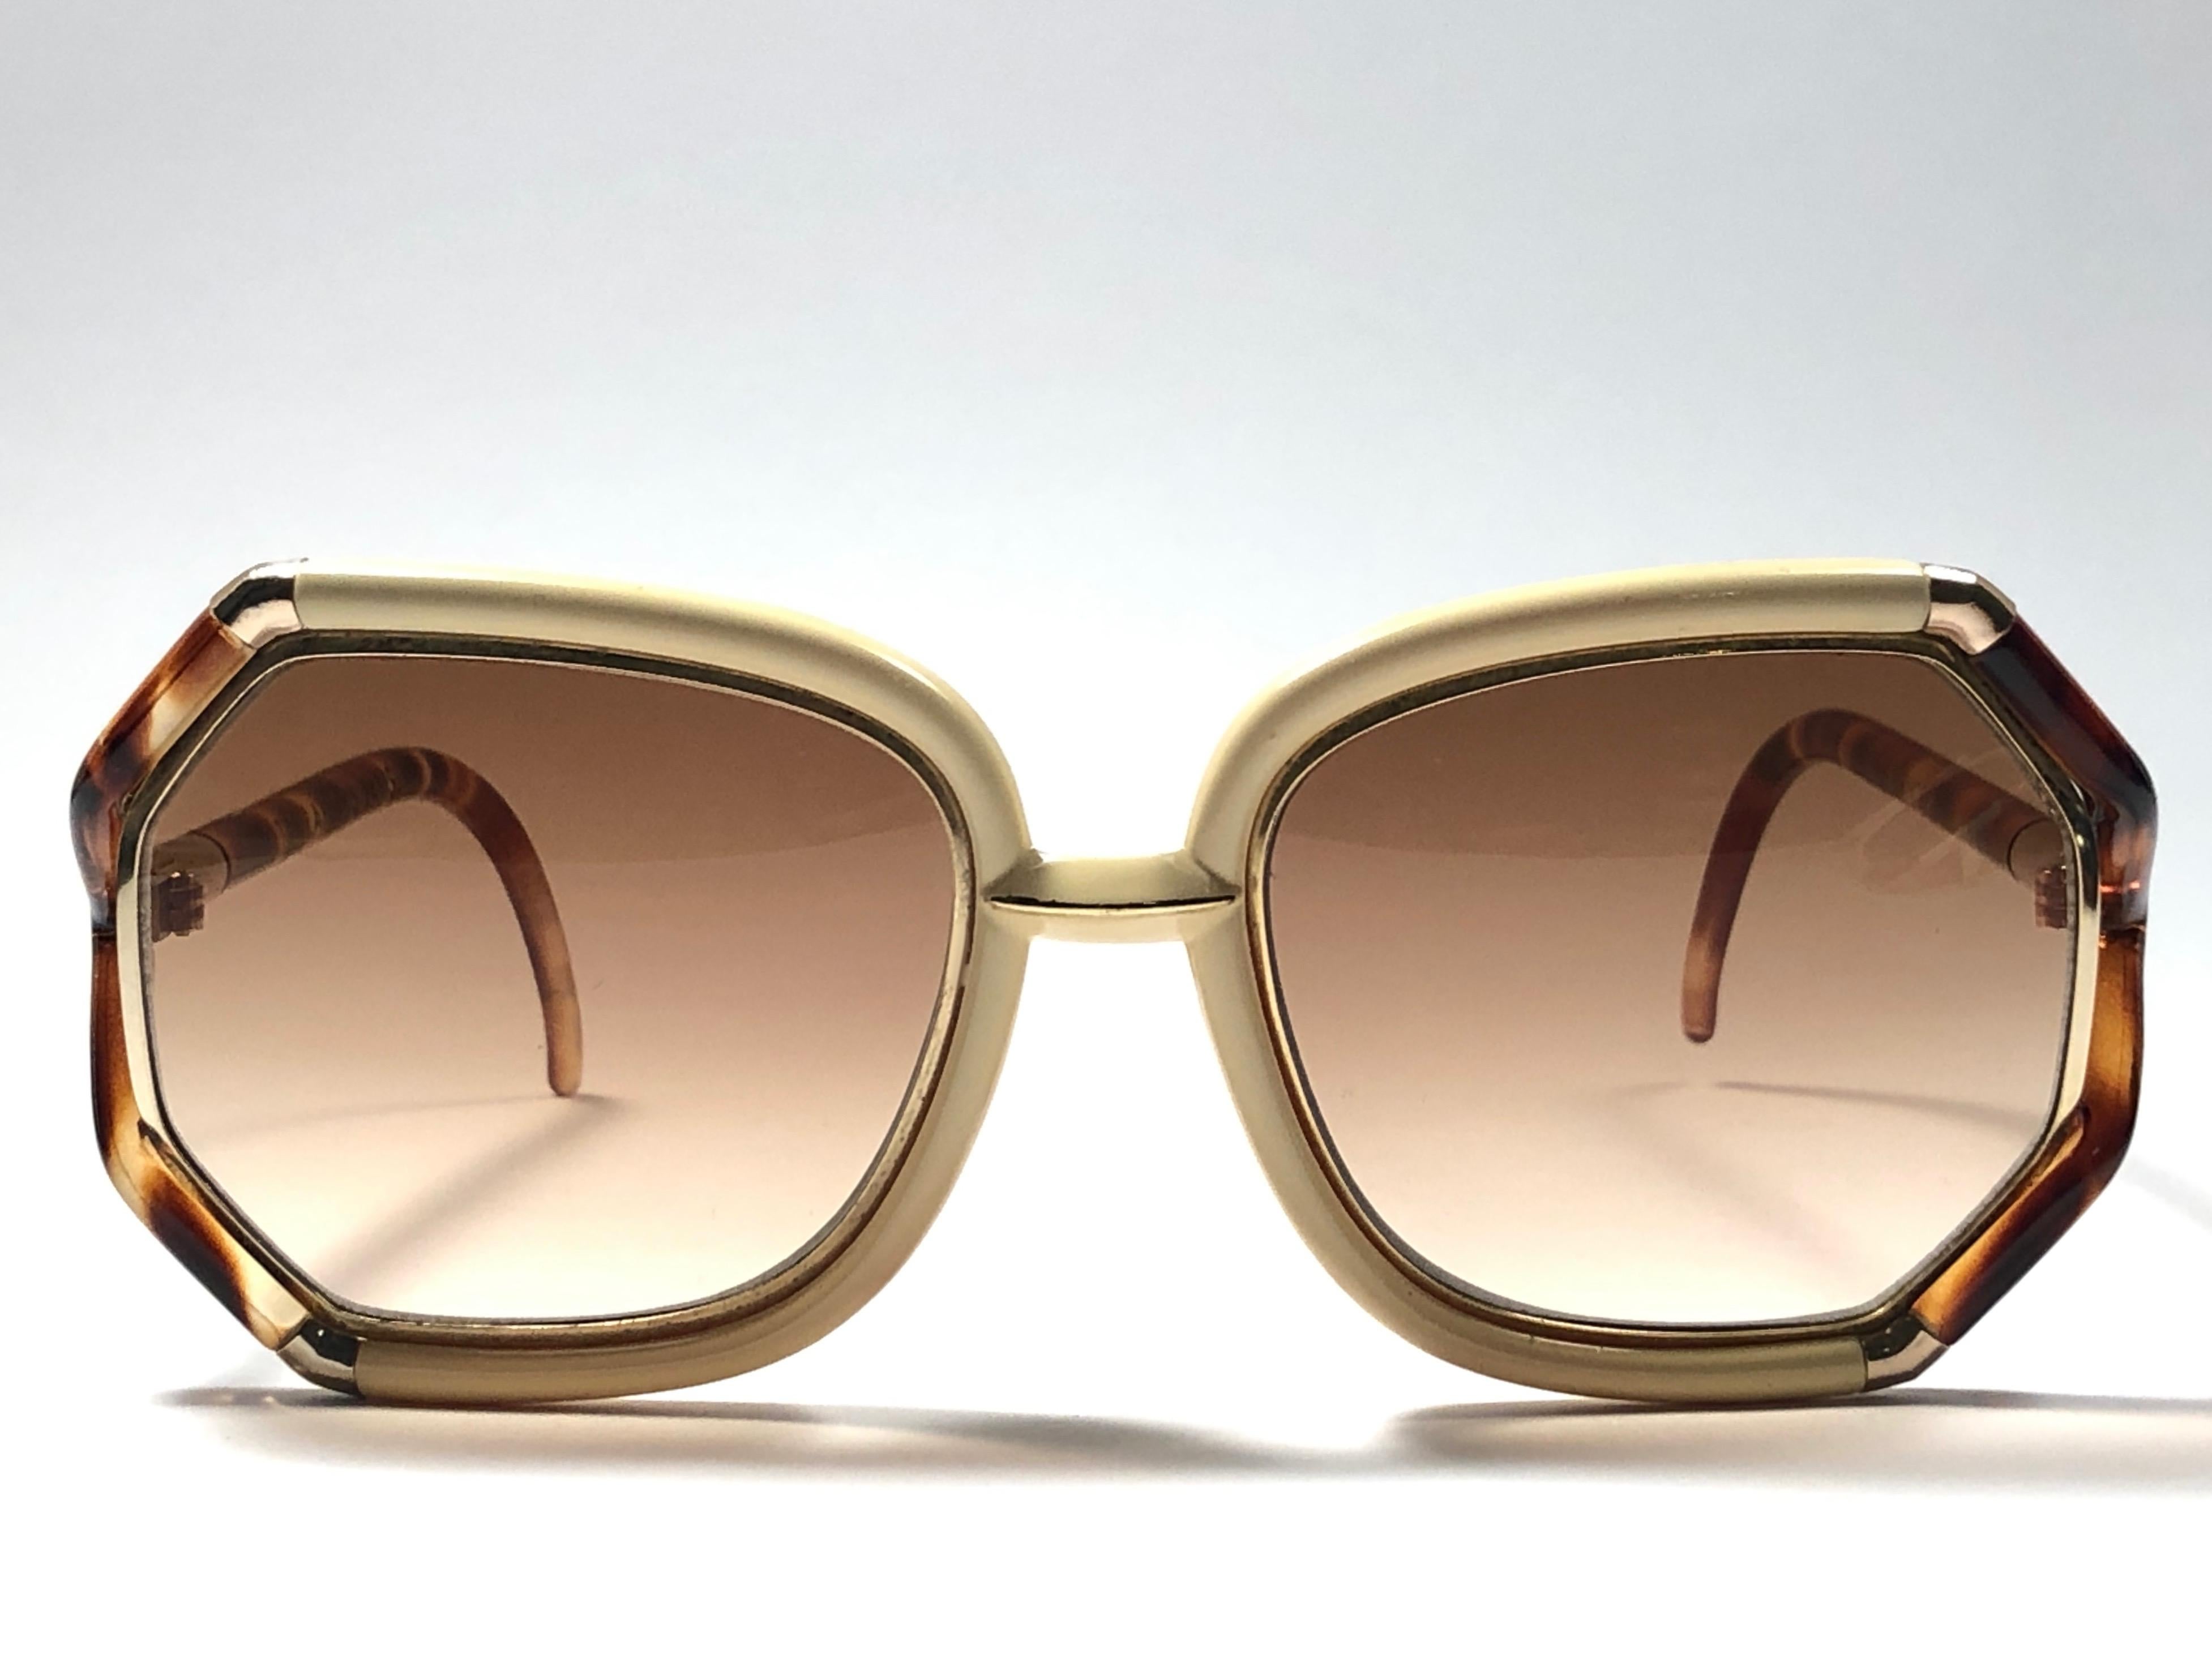 New Vintage Ted Lapidus jade beige & gold frame.
Made in Paris.  
Produced and design in 1970's.  
This pair has been gently worn therefore it show minor sign pf wear due to storage.
